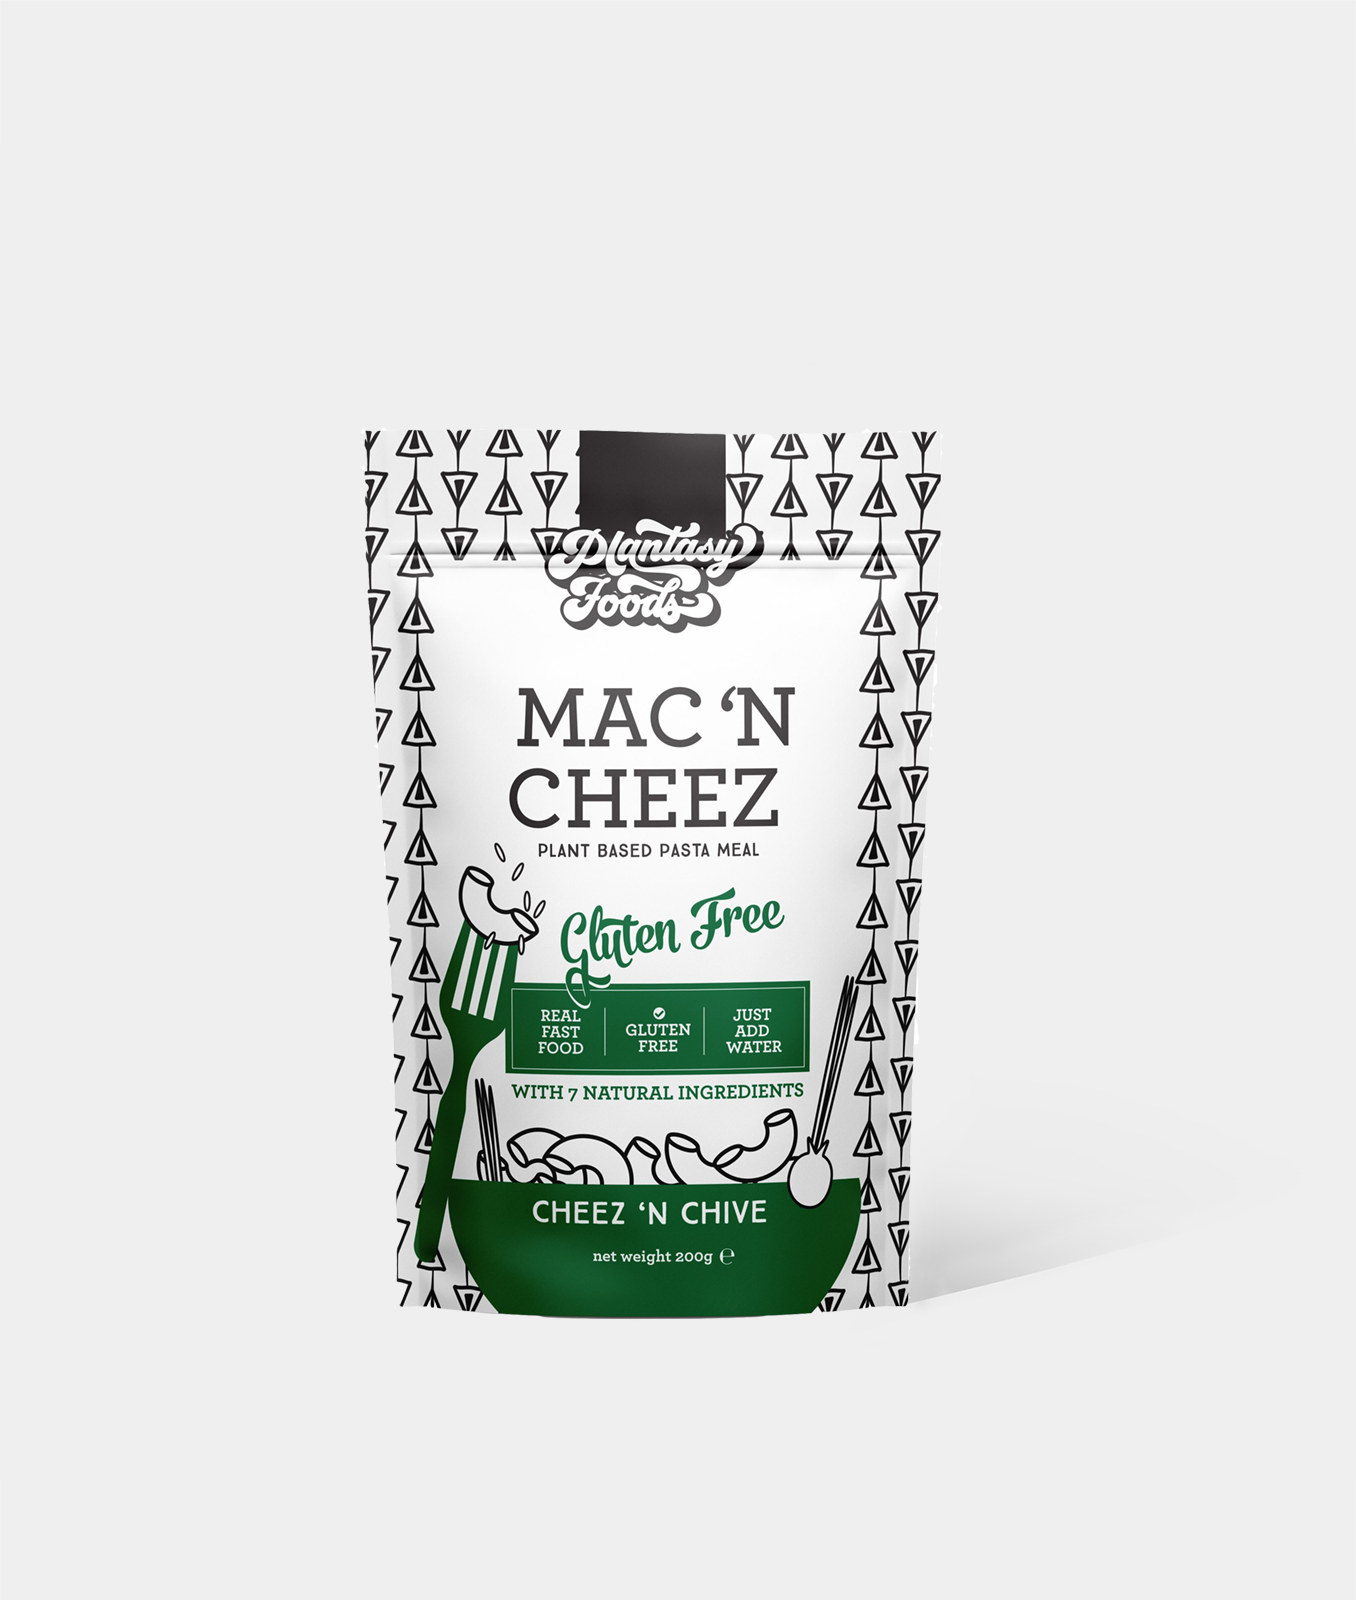 Macn Cheez Plant Based Pasta Meal Cheez N Chive By Plantasy Foods